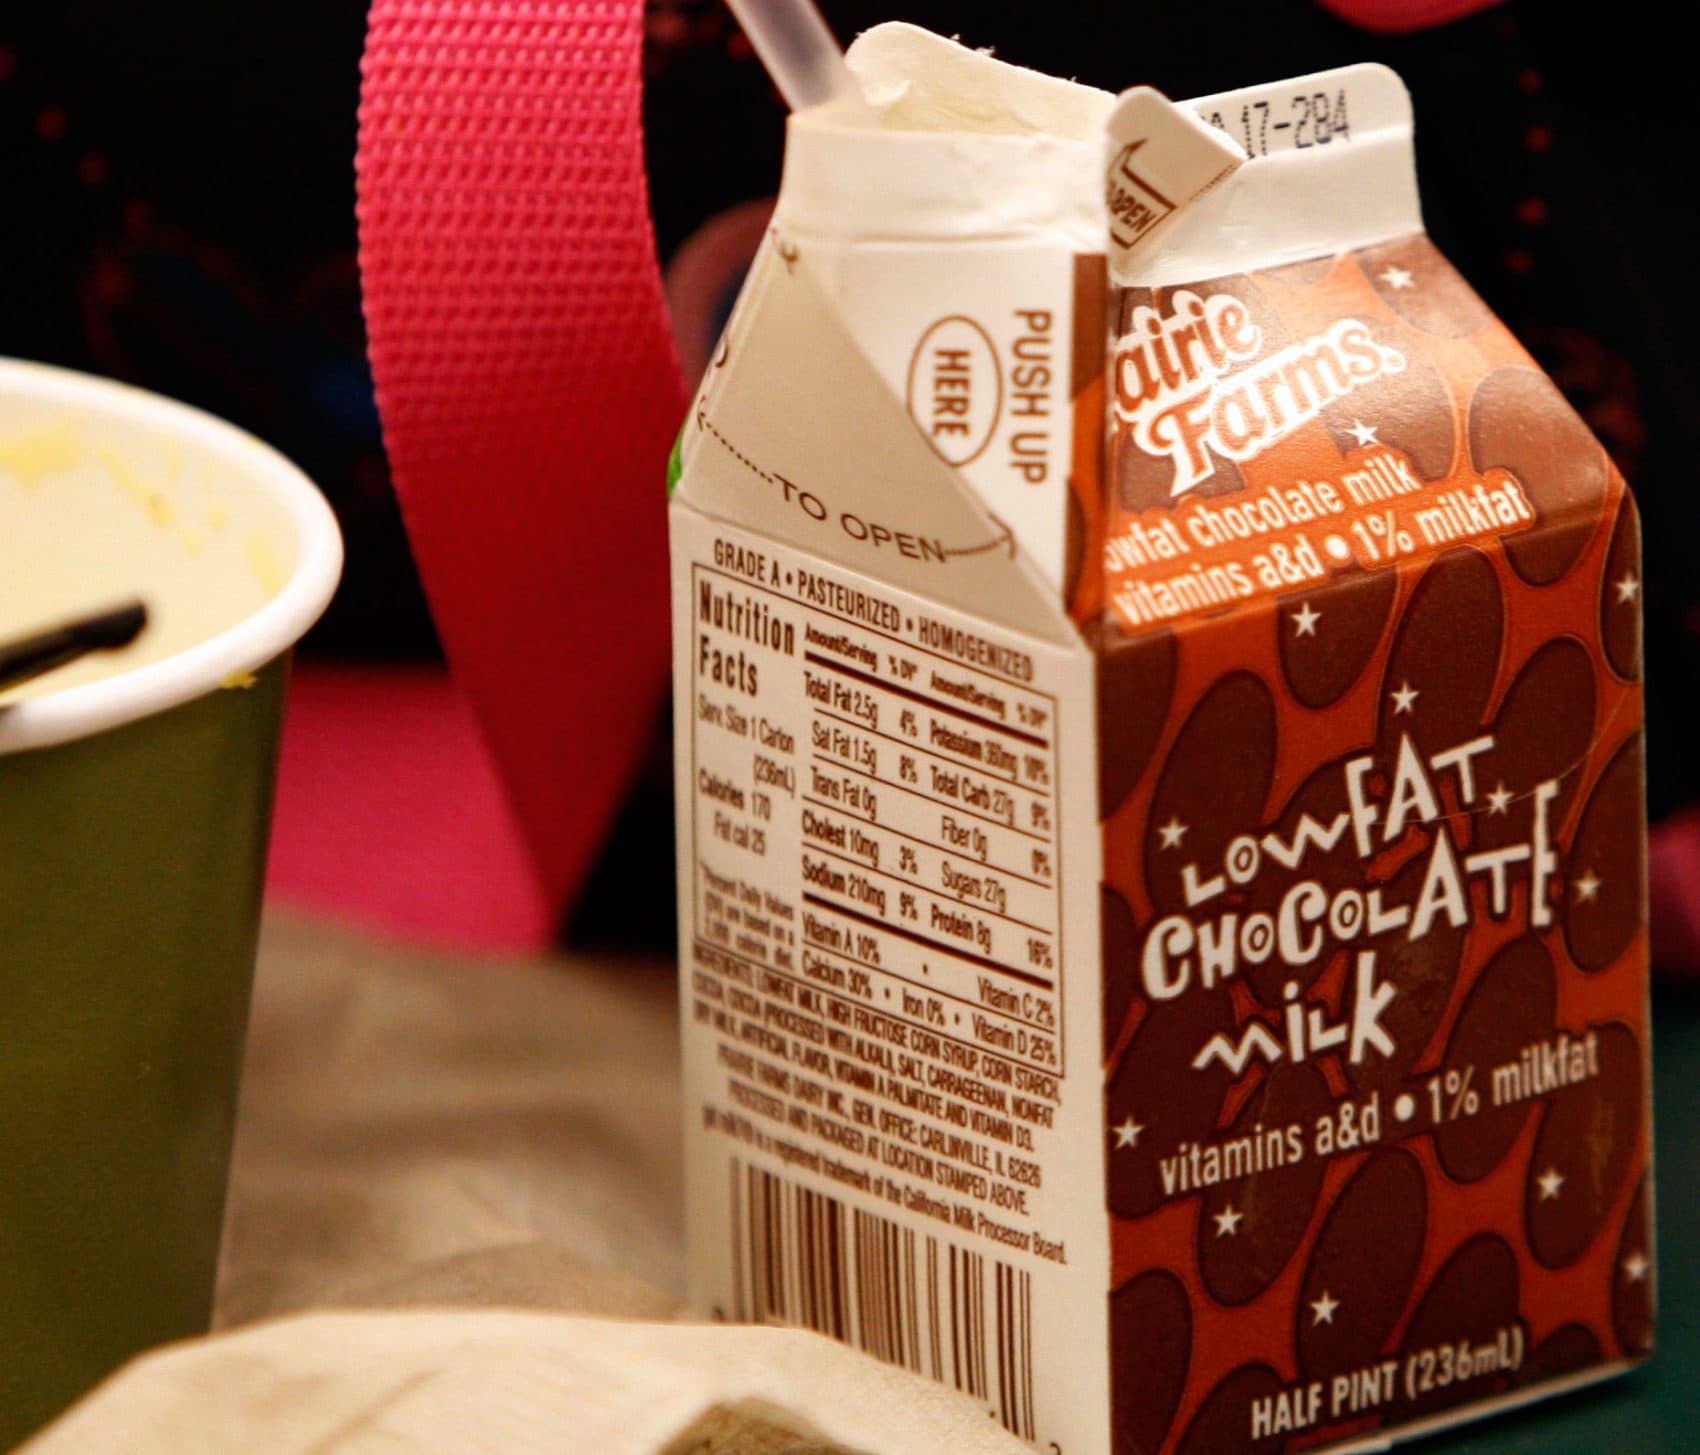 In Long Fight Over School Chocolate Milk, Perhaps A Whole New Flavor